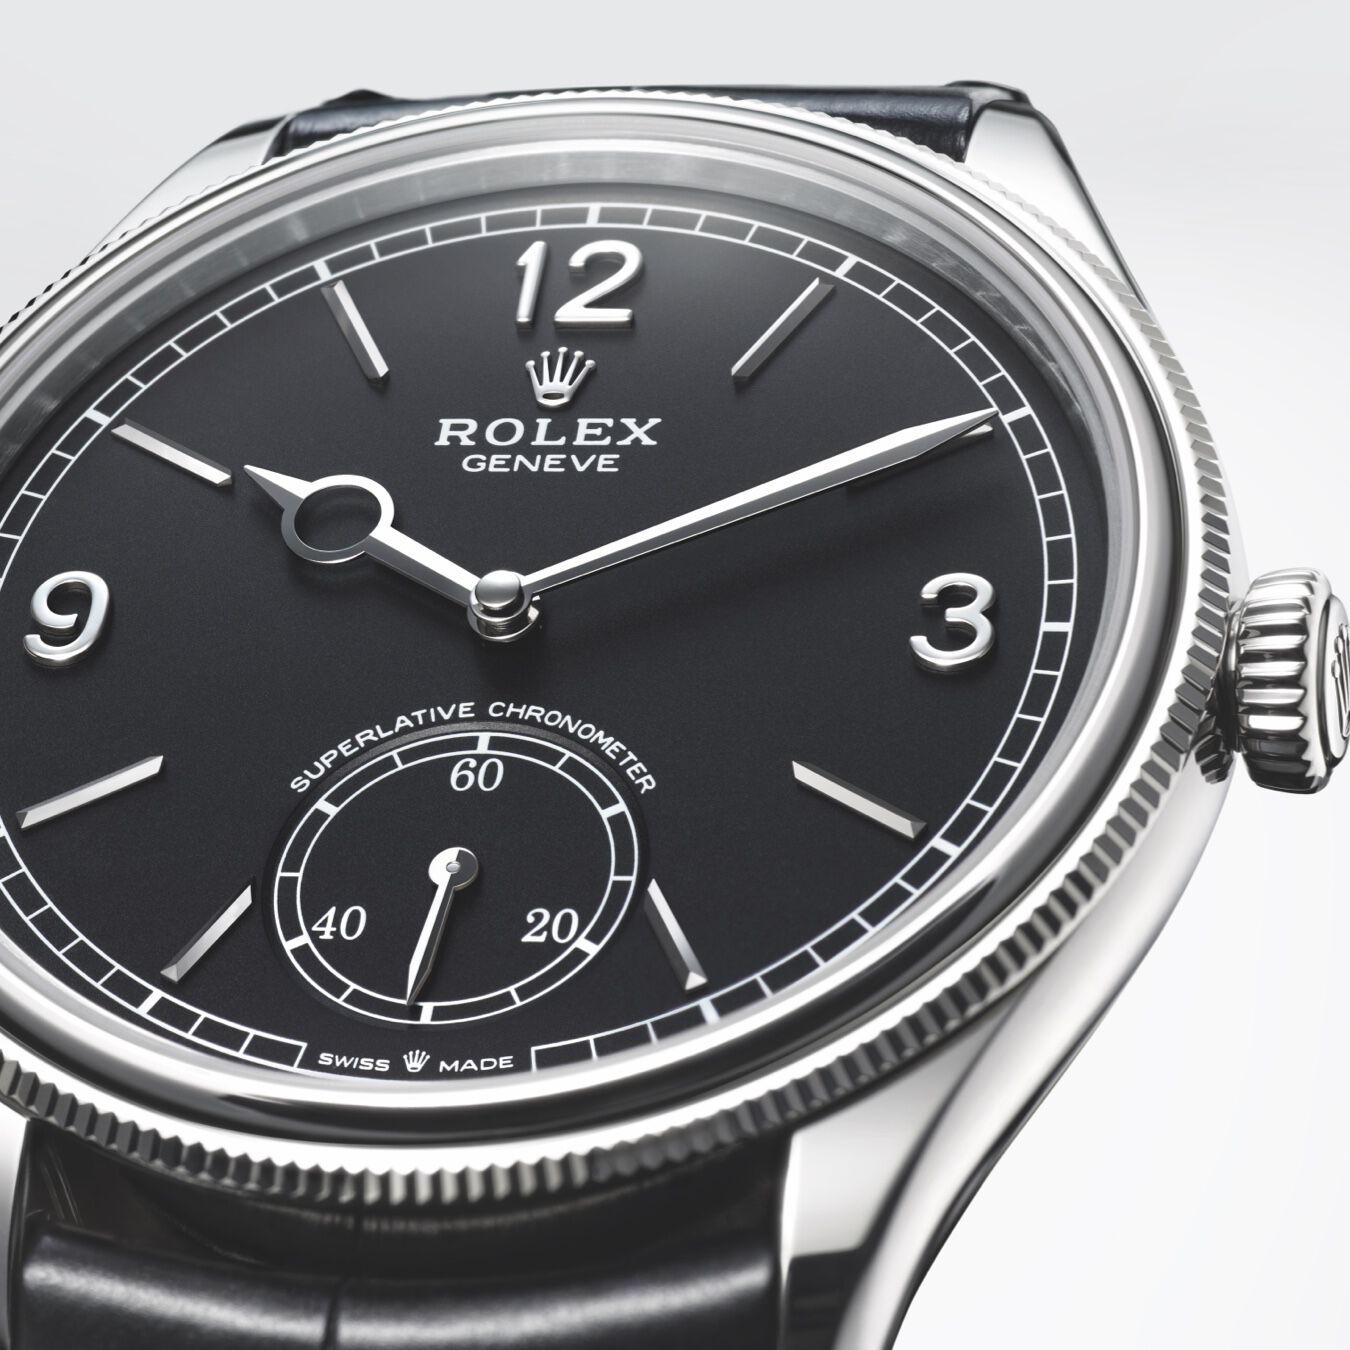 Close up of intense black dial and white gold indices of the Rolex 1908. 